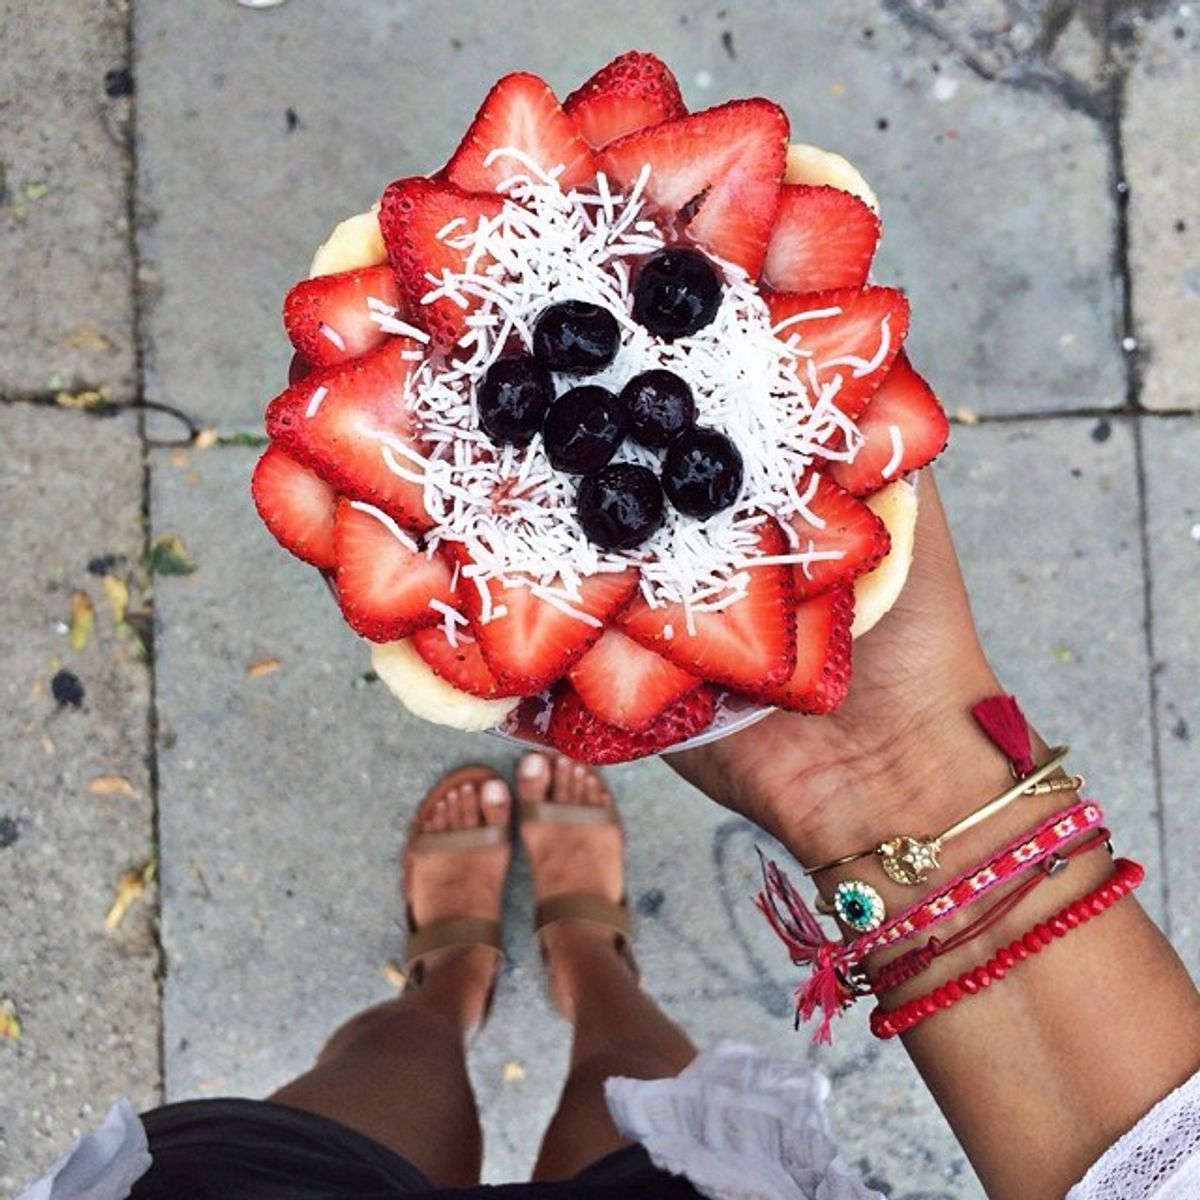 Acai Bowls: The Breakfast Trend You Should Be Trying